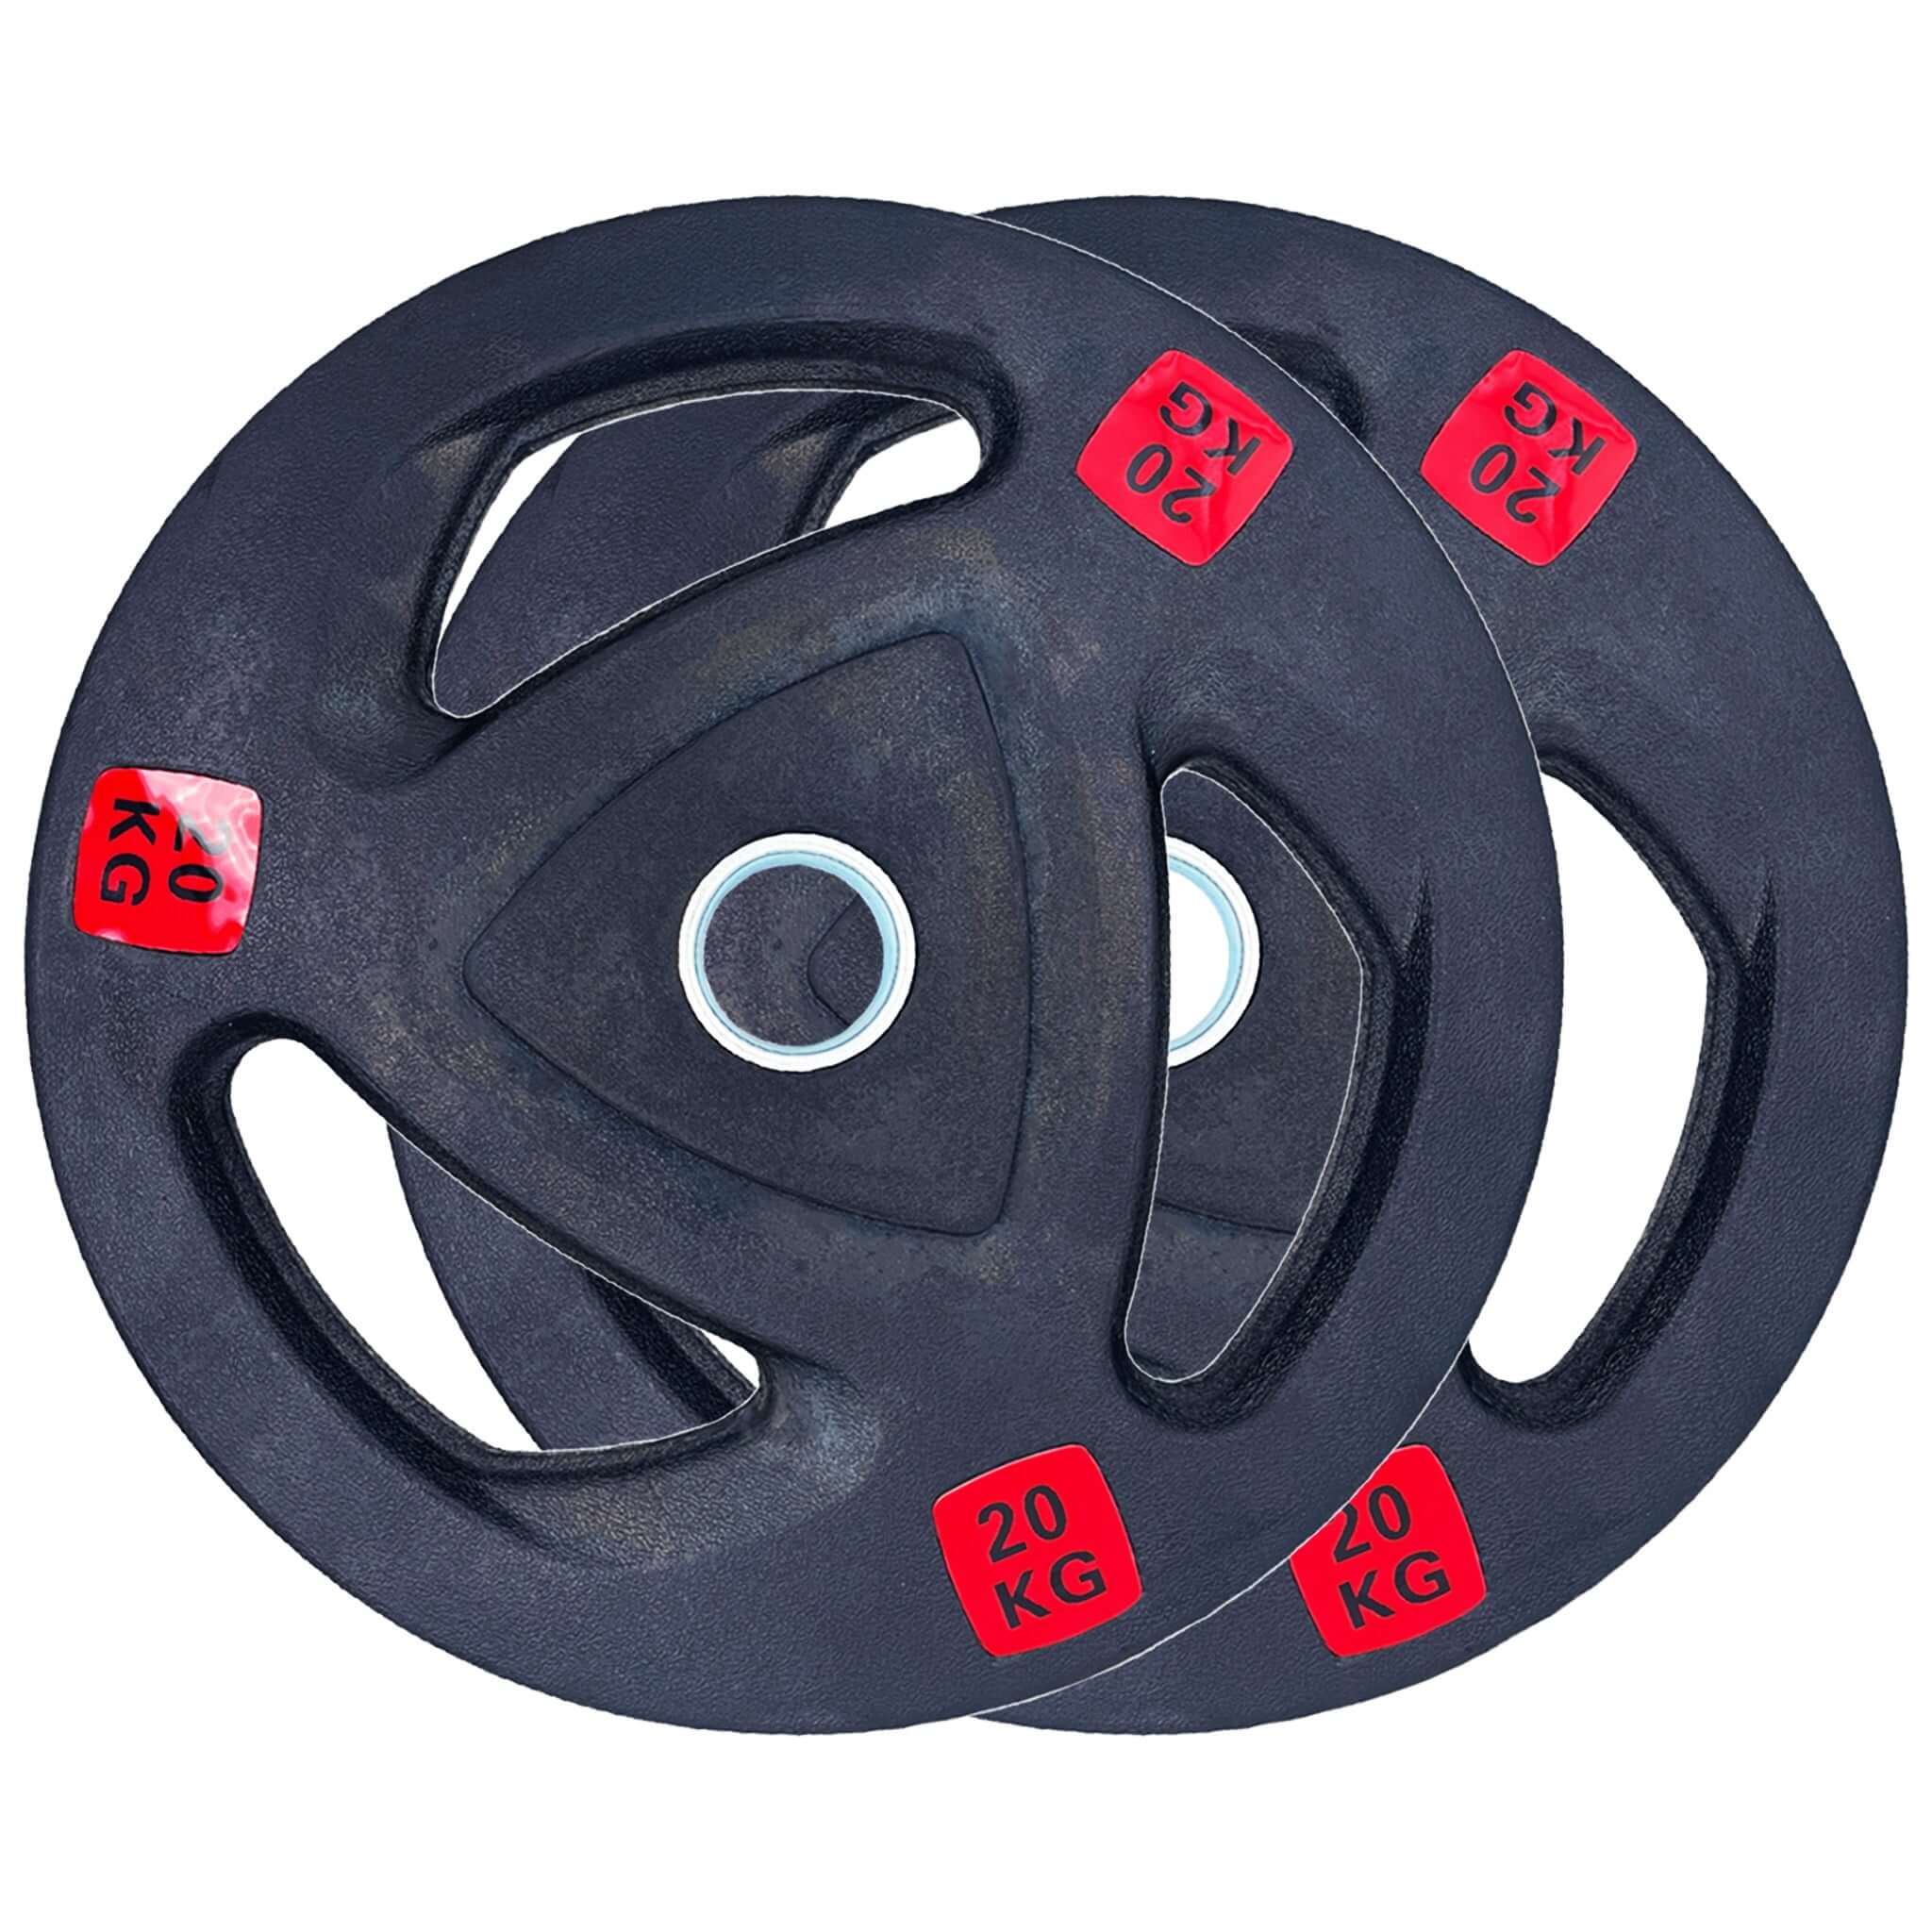 Rubber Coated Type-A Tri-Grip Weight Plates 87.5kg Bundle | Tri Grip Rubber Plates | INSOURCE